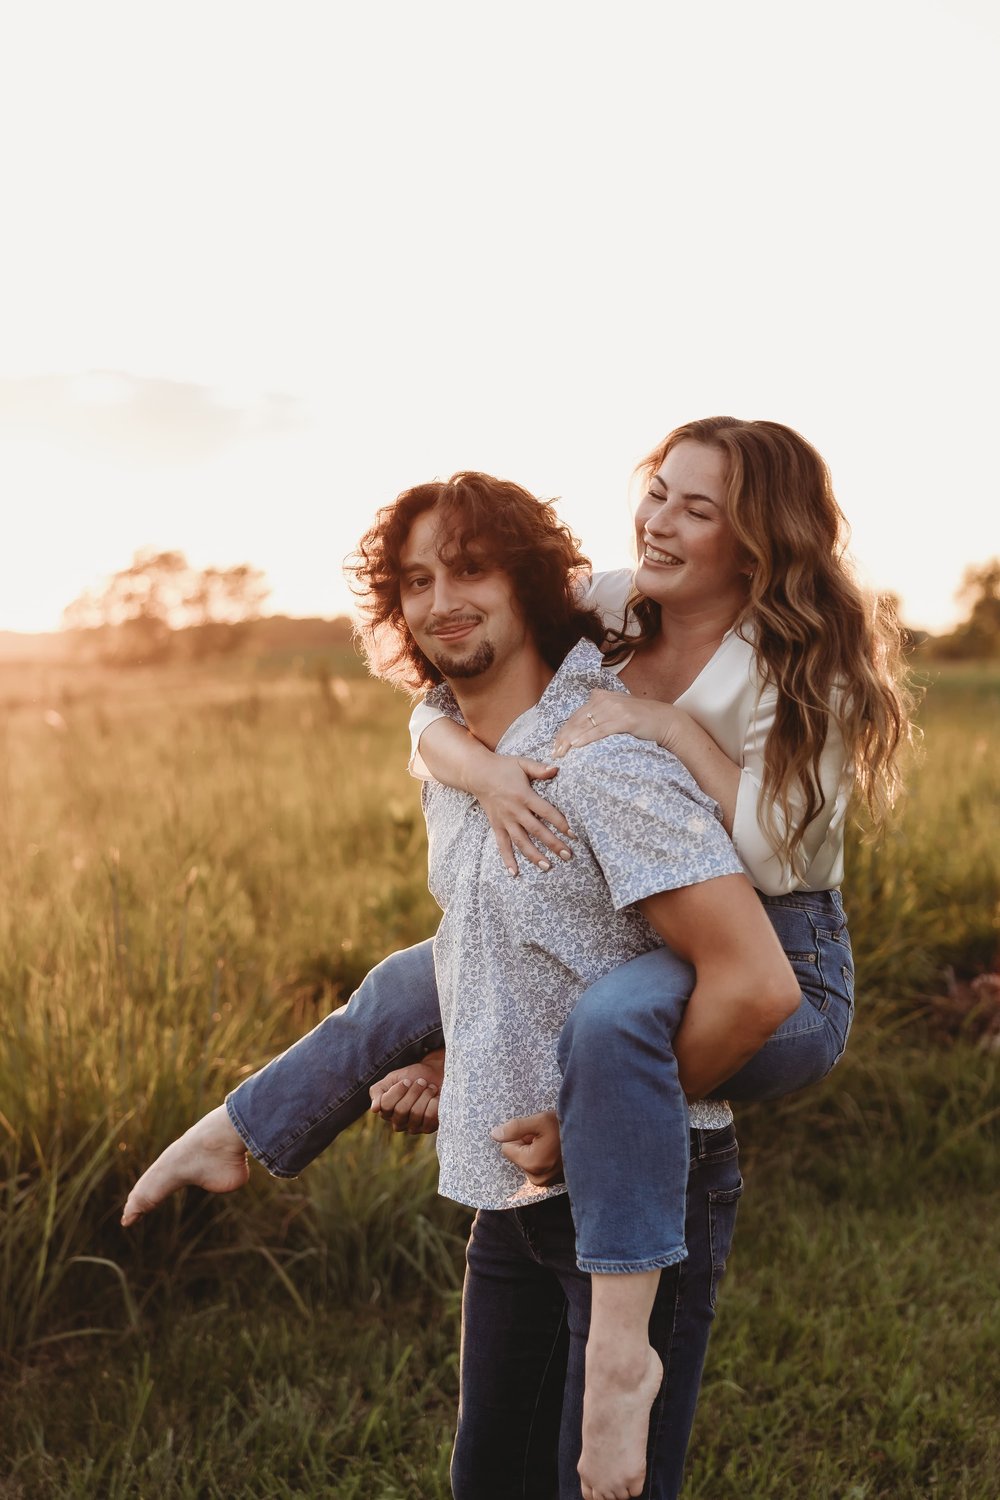  a man gives his fiancee a piggy back ride in a field as the sun sets 